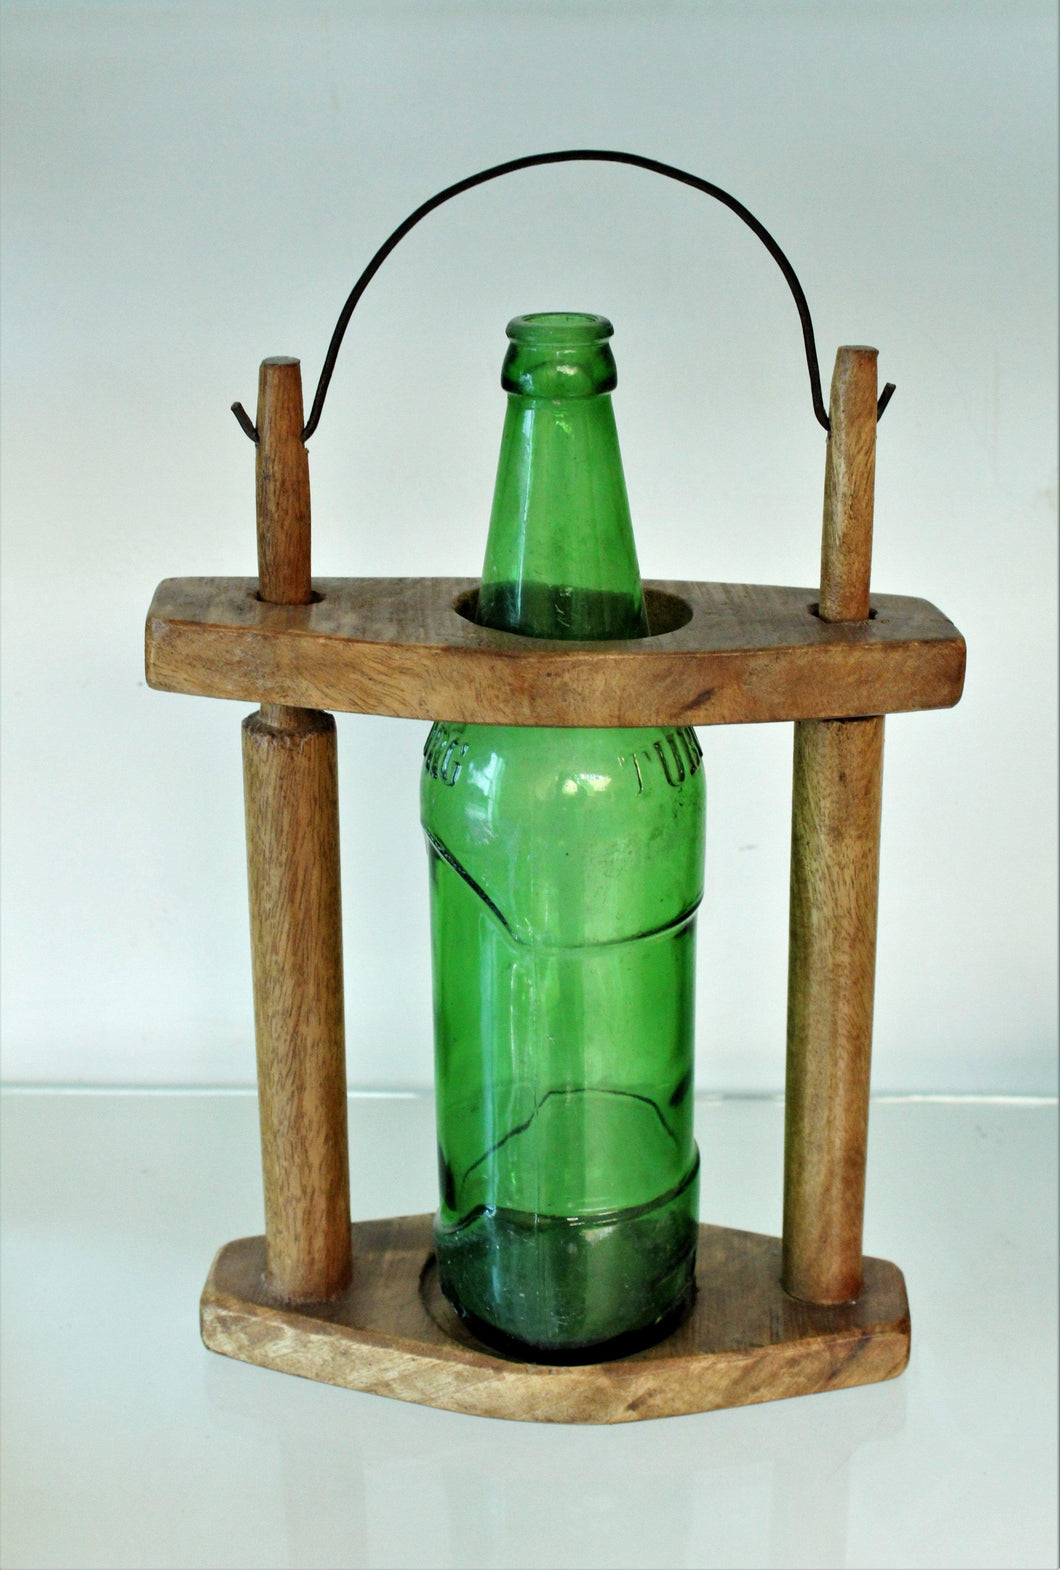 Beautiful Vintage Wooden Hanging Bottle Holder | Size 21 x 8.5 x 34 cm - Style It by Hanika